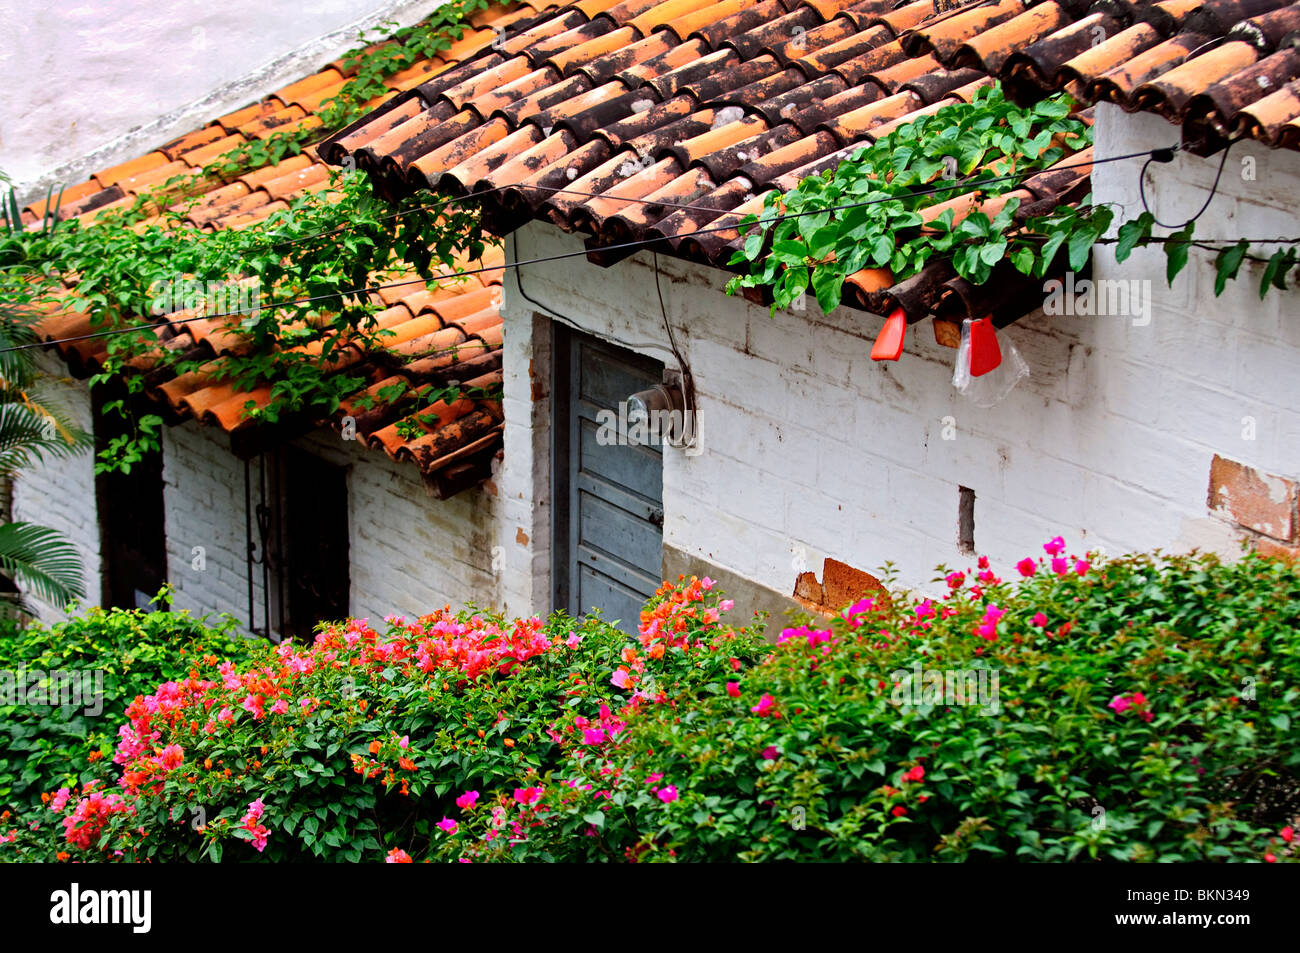 Old building with red tile roofs in Puerto Vallarta, Jalisco, Mexico Stock Photo